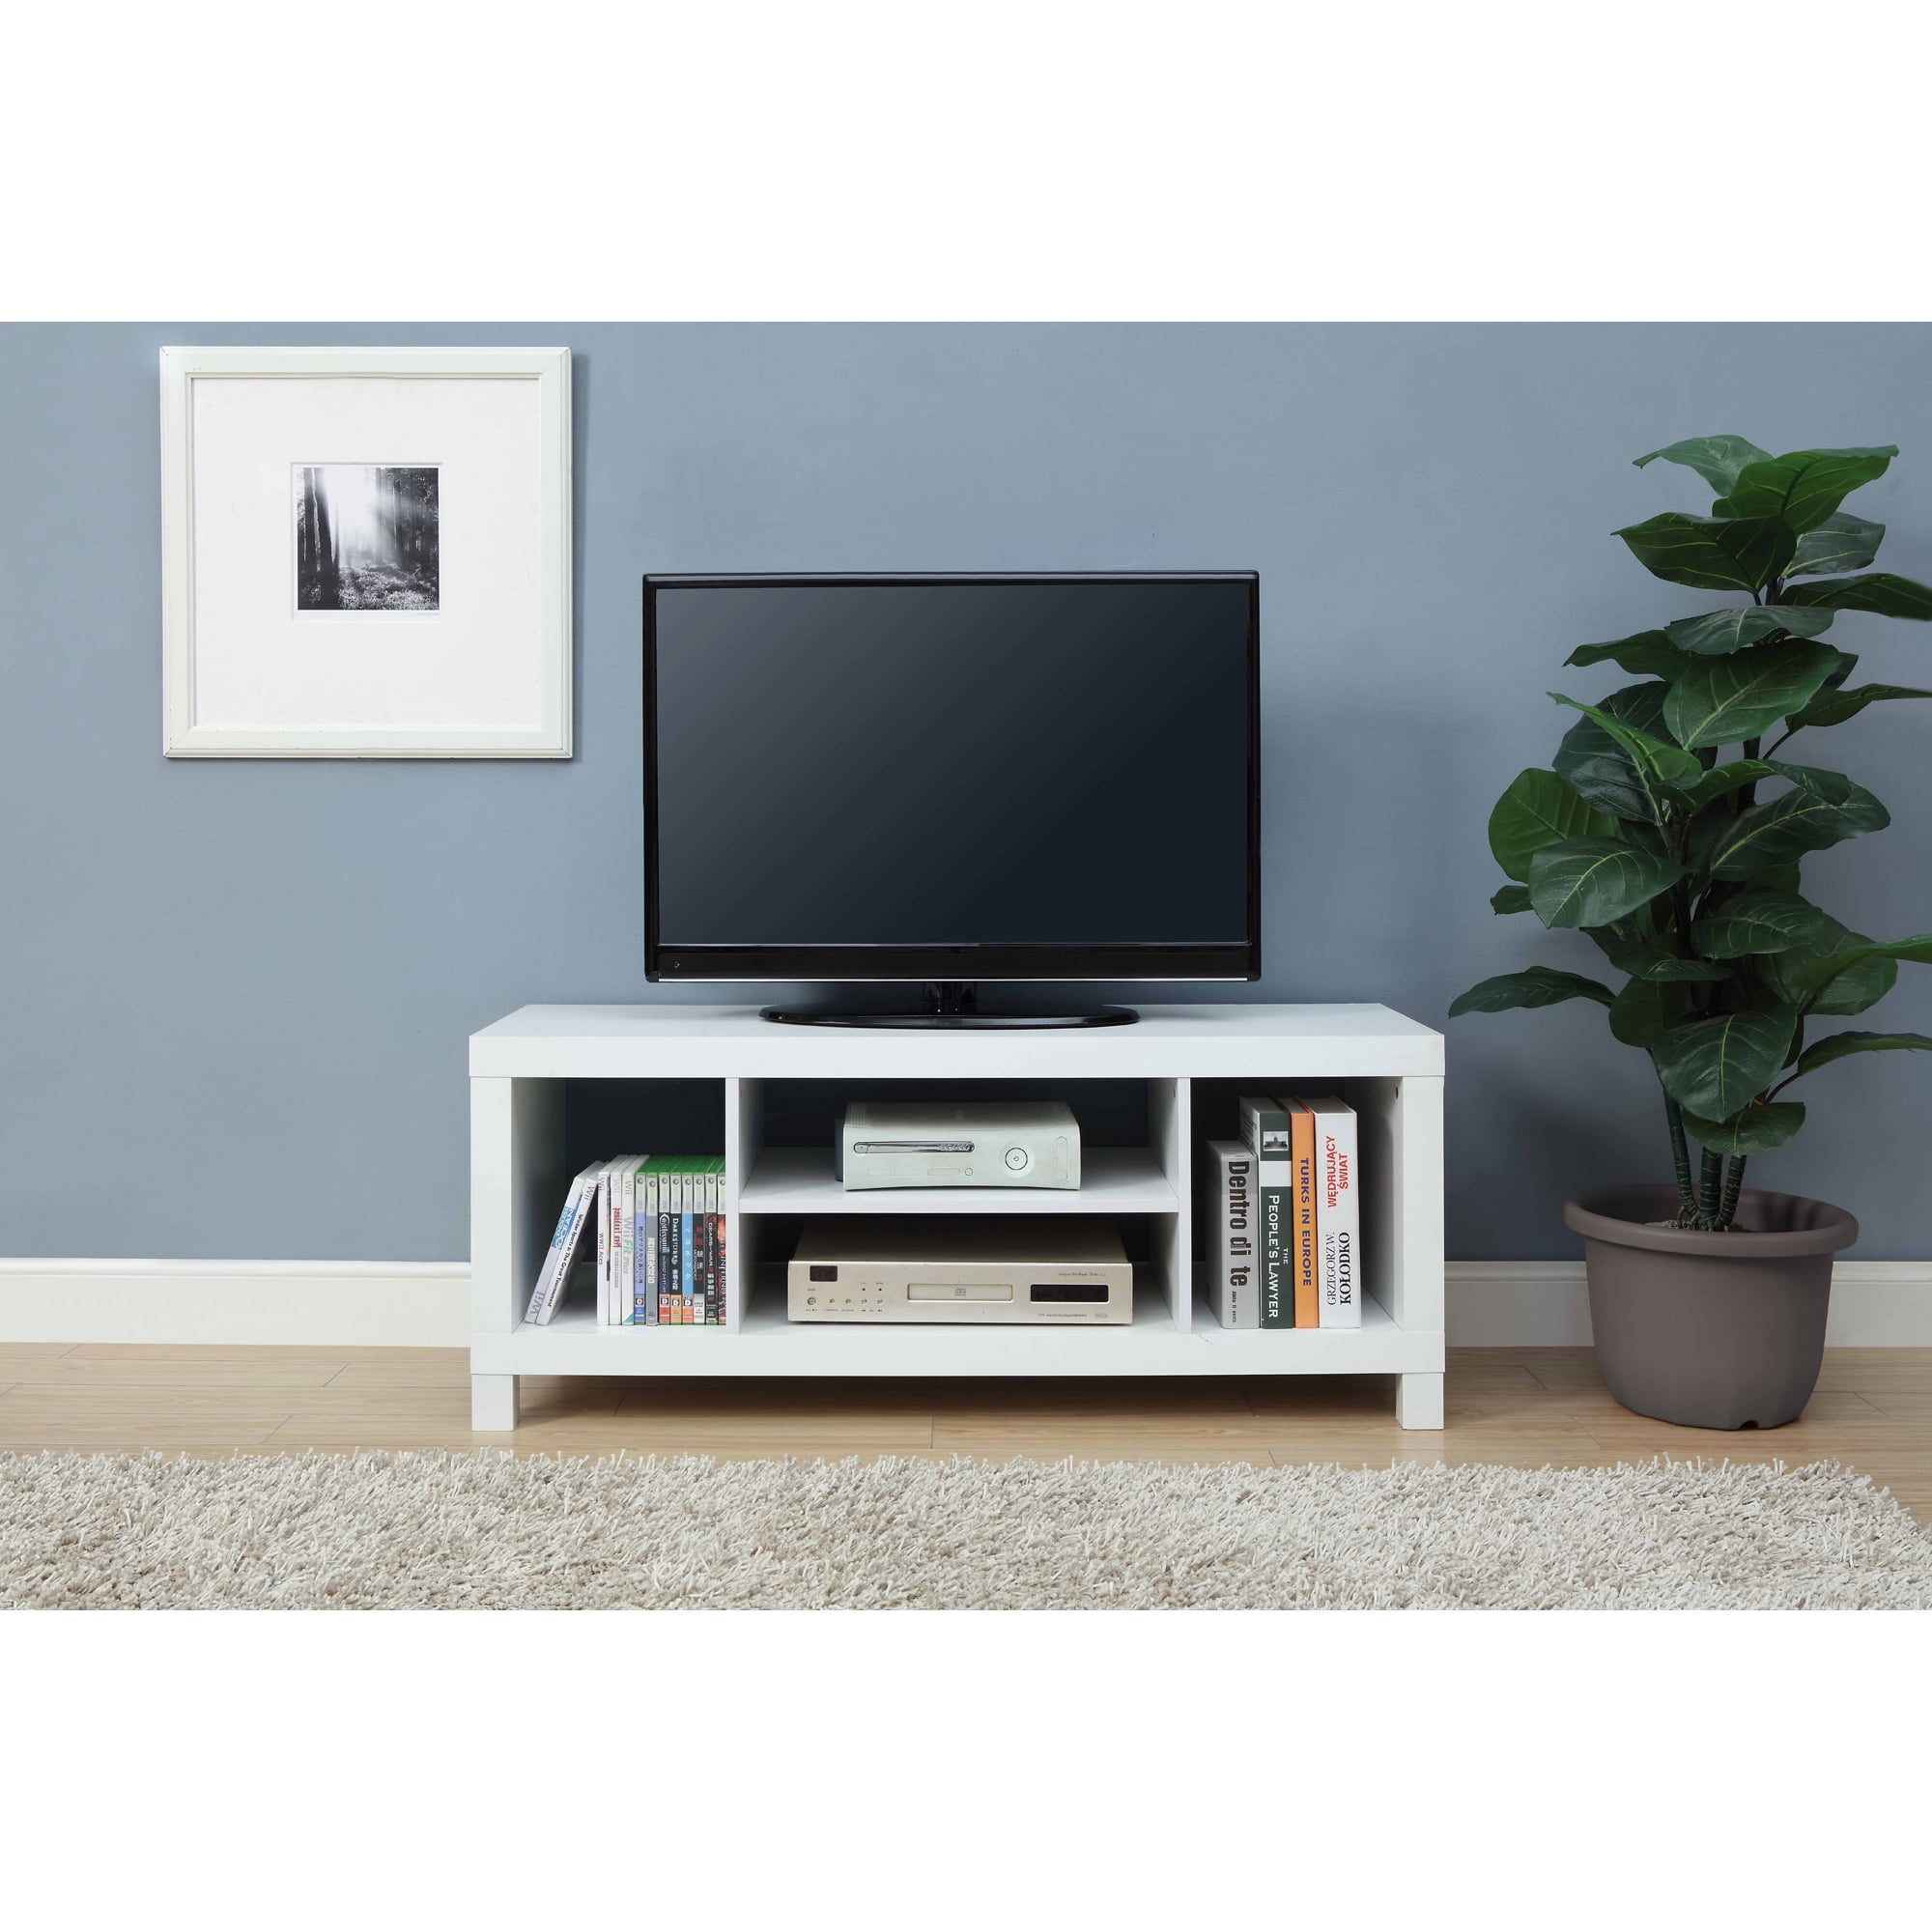 Mainstays TV Stand for TVs up to 42", White